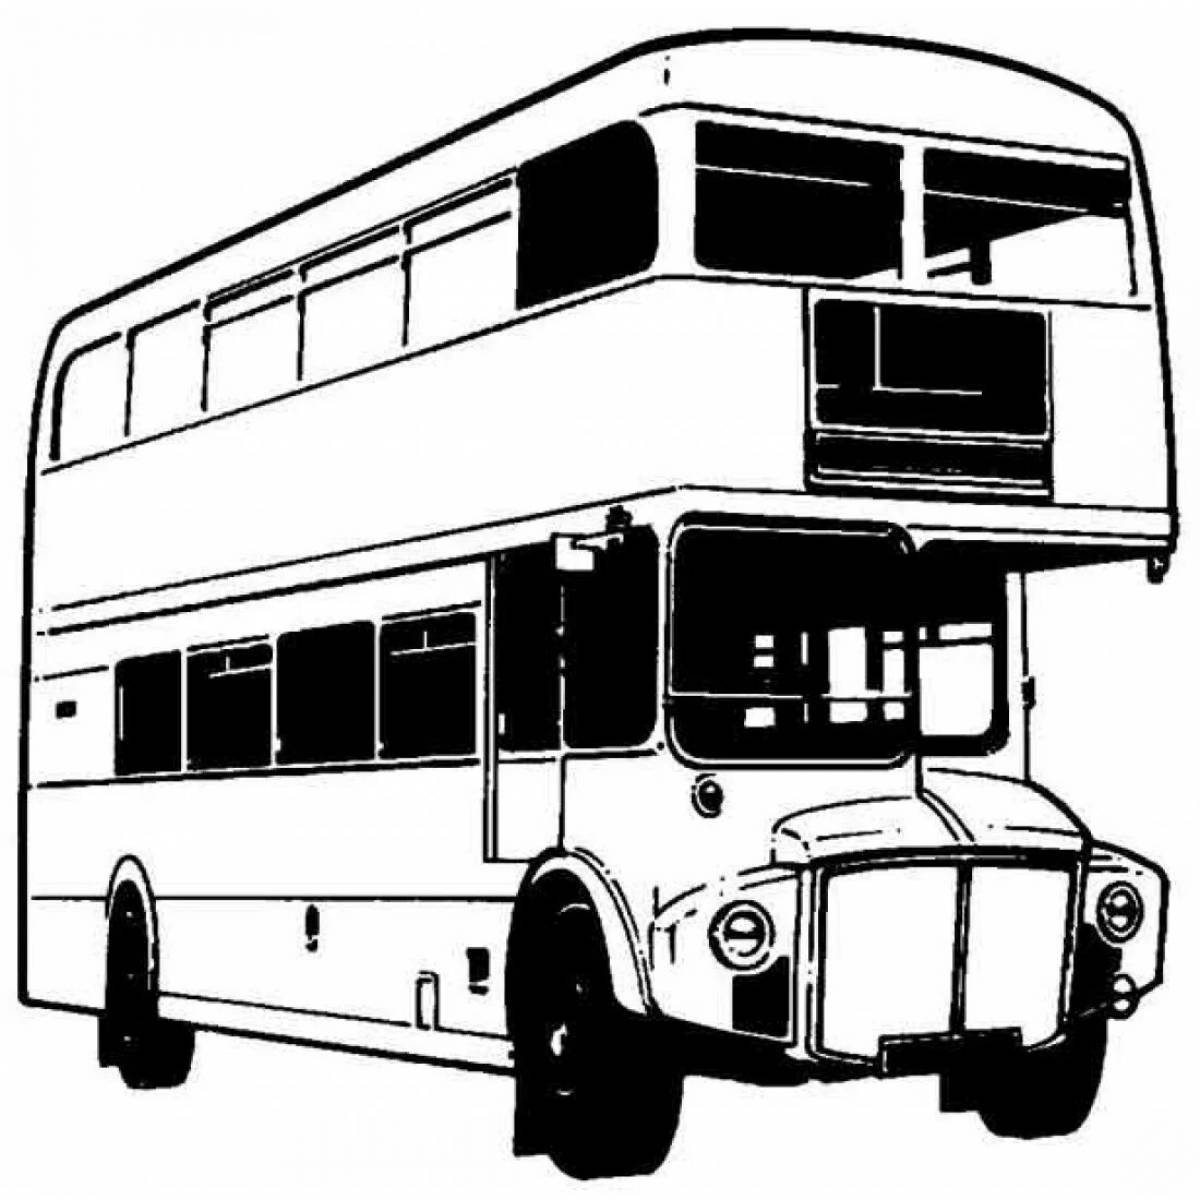 English bus coloring page with shimmering colors